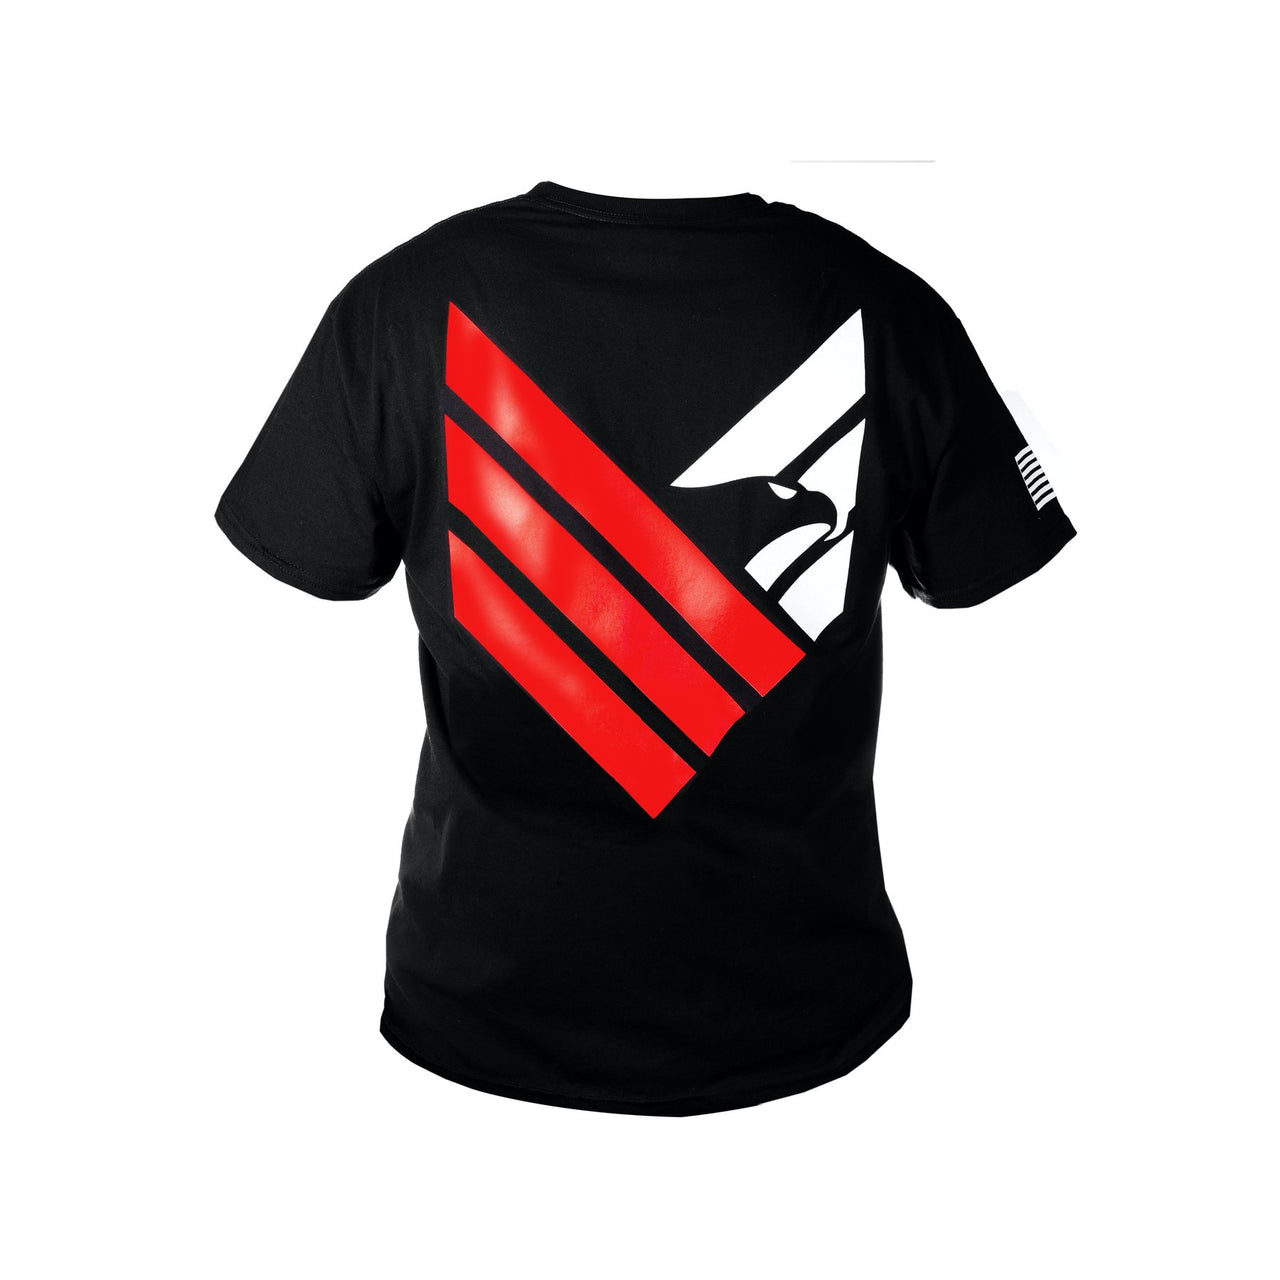 Black Body Armor Direct T-shirt with a large red and white graphic design on the back, representing Body Armor Direct through abstract shapes and stripes.